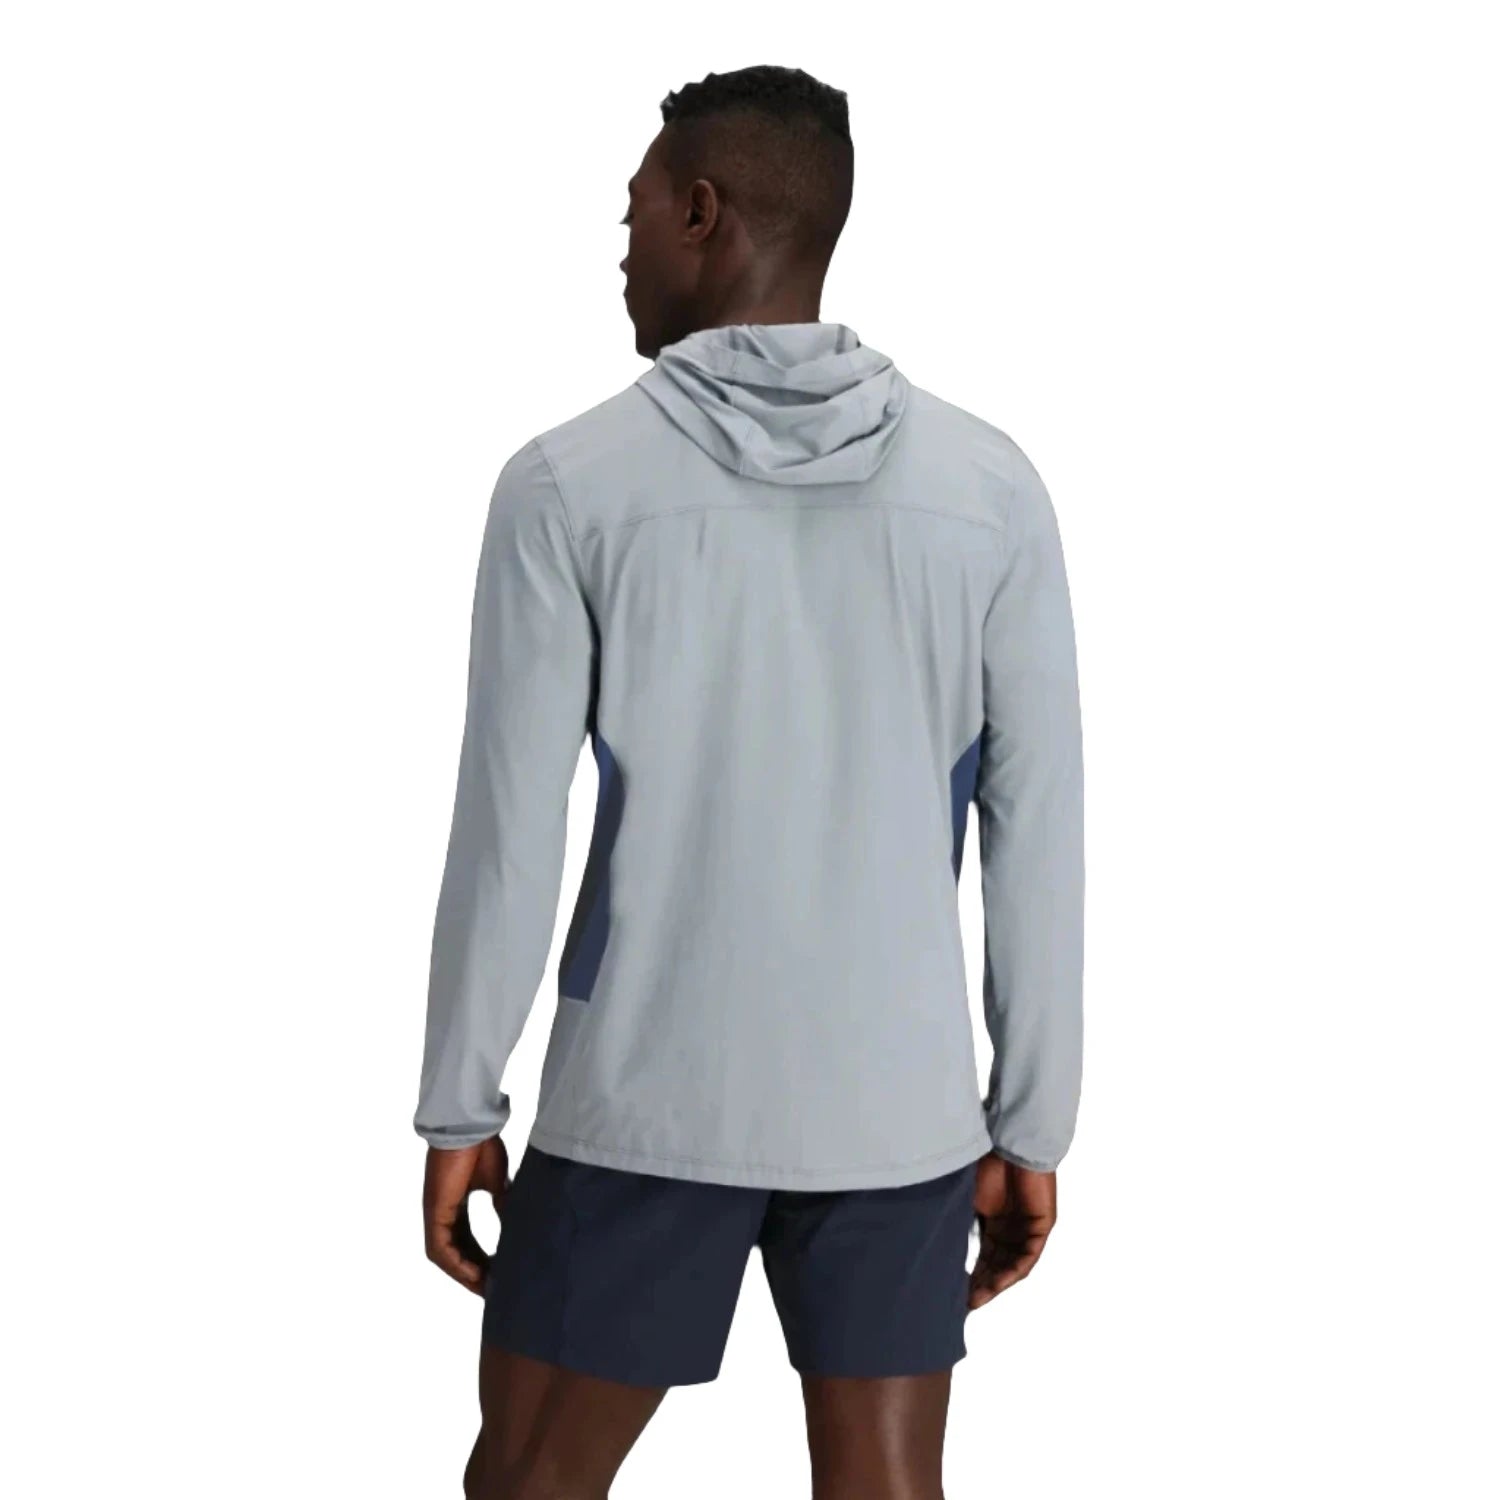 Outdoor Research Men's Astroman Air Sun Hoodie shown in the Slate/Cenote color option. Back view on model.